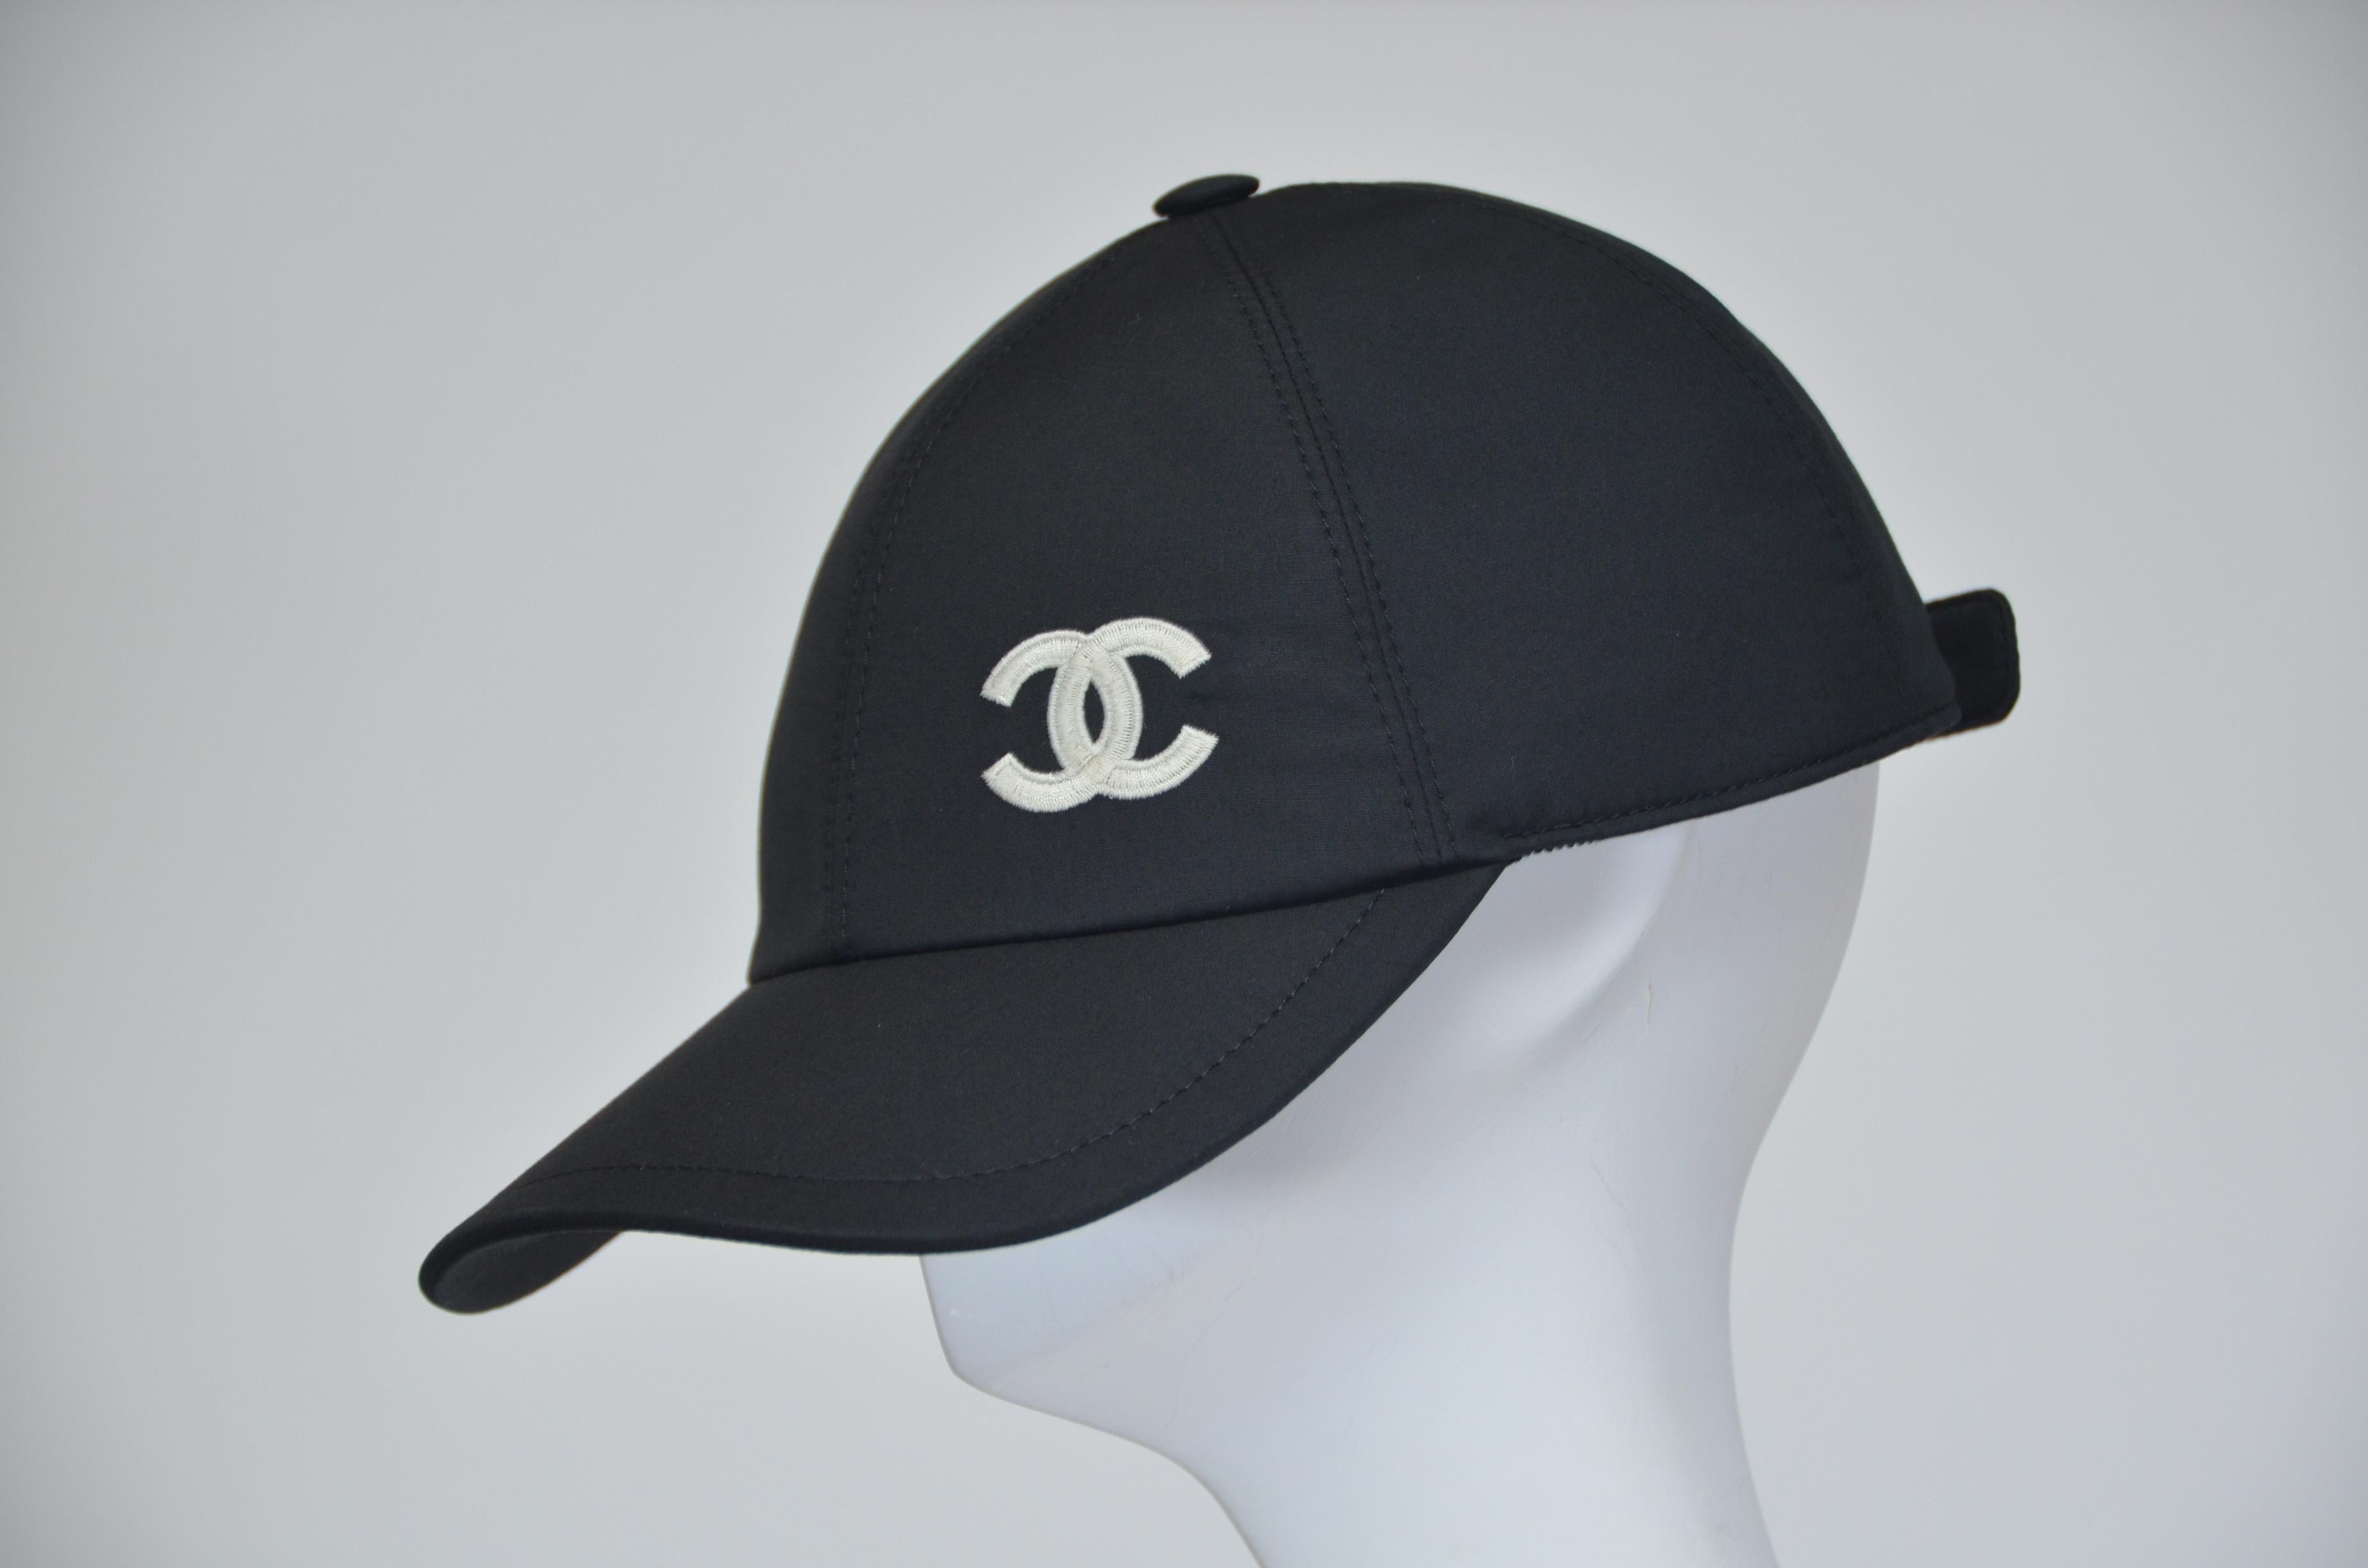 100% authentic guaranteed Chanel hat 
LAST ONE AVAILABLE FOR SALE.....
New with tags
Made in Italy
100% cotton 
ONE SIZE FITS ALL
FINAL SALE